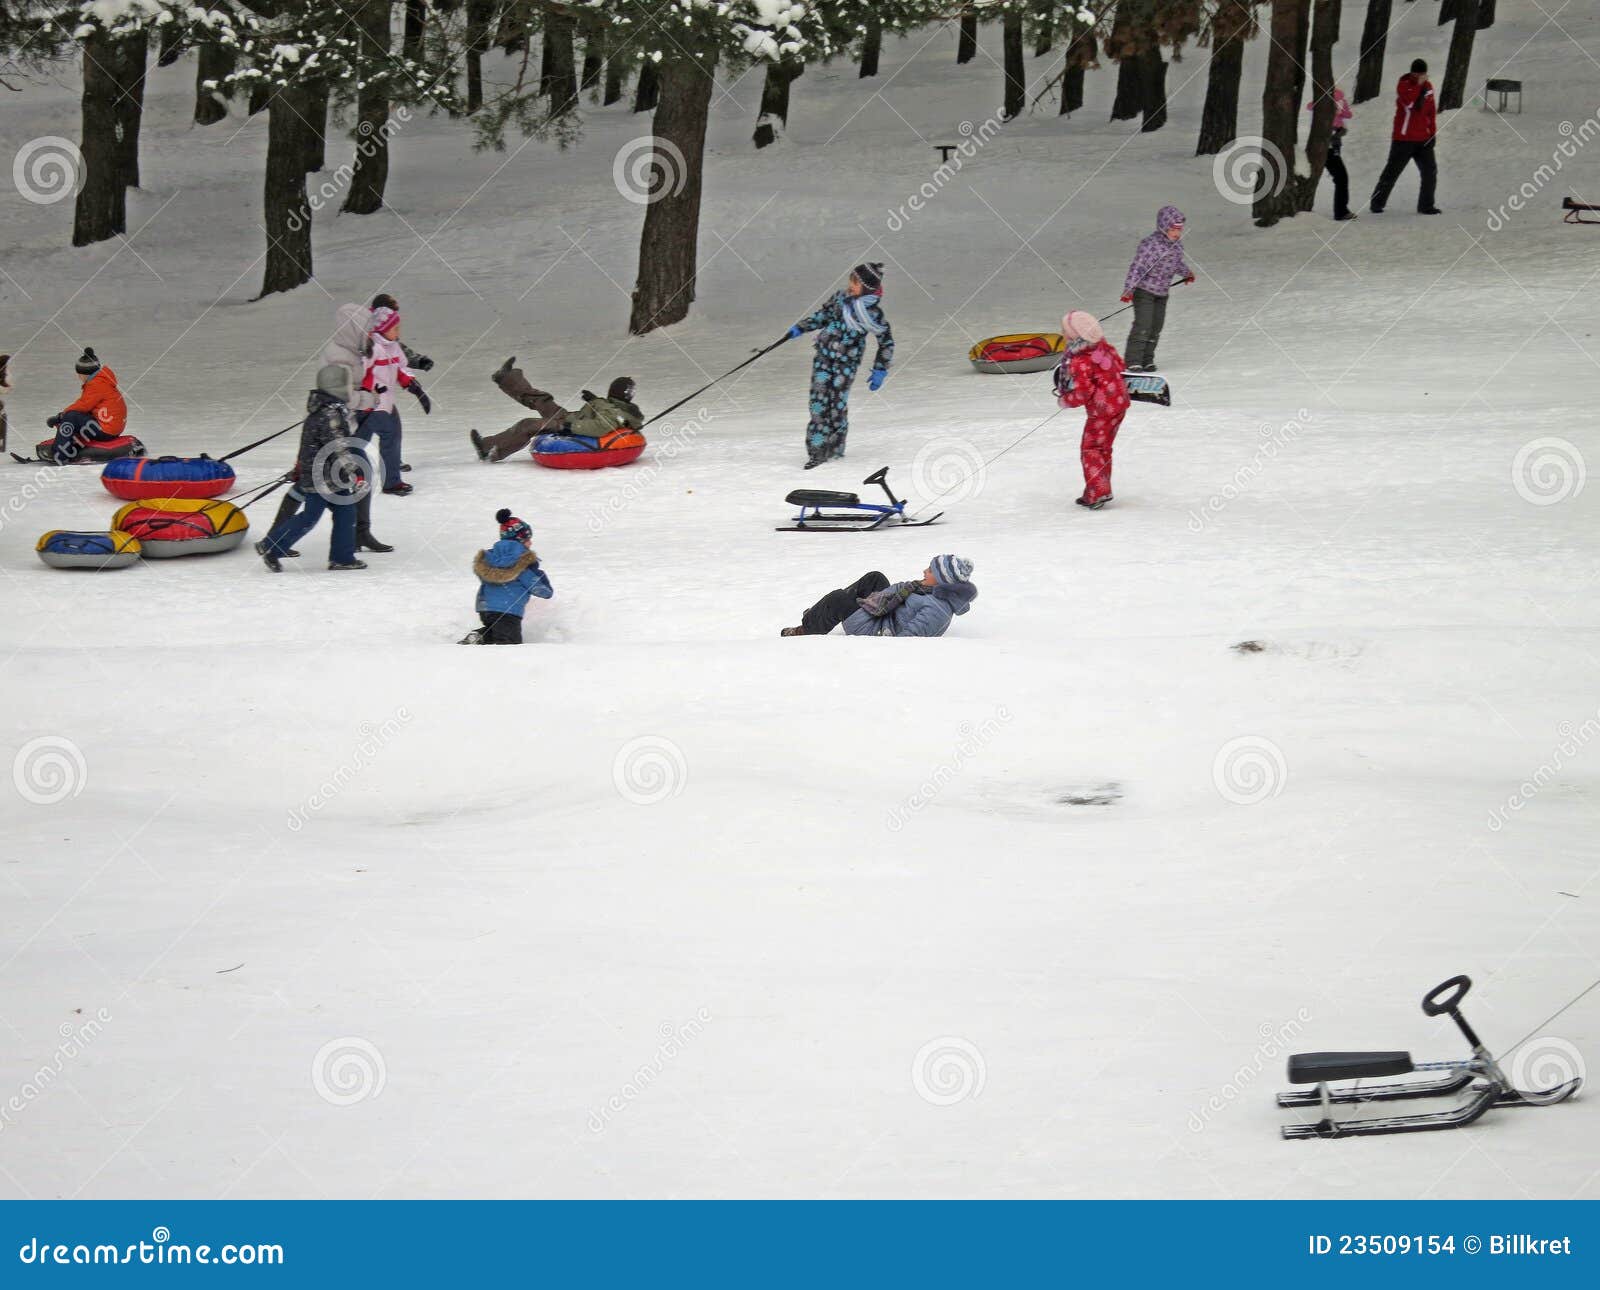 Winter in Russia. Severe snowfall in Moscow. Moscow, Russian Federation - February 19, 2012. Children playing in the fresh snow.